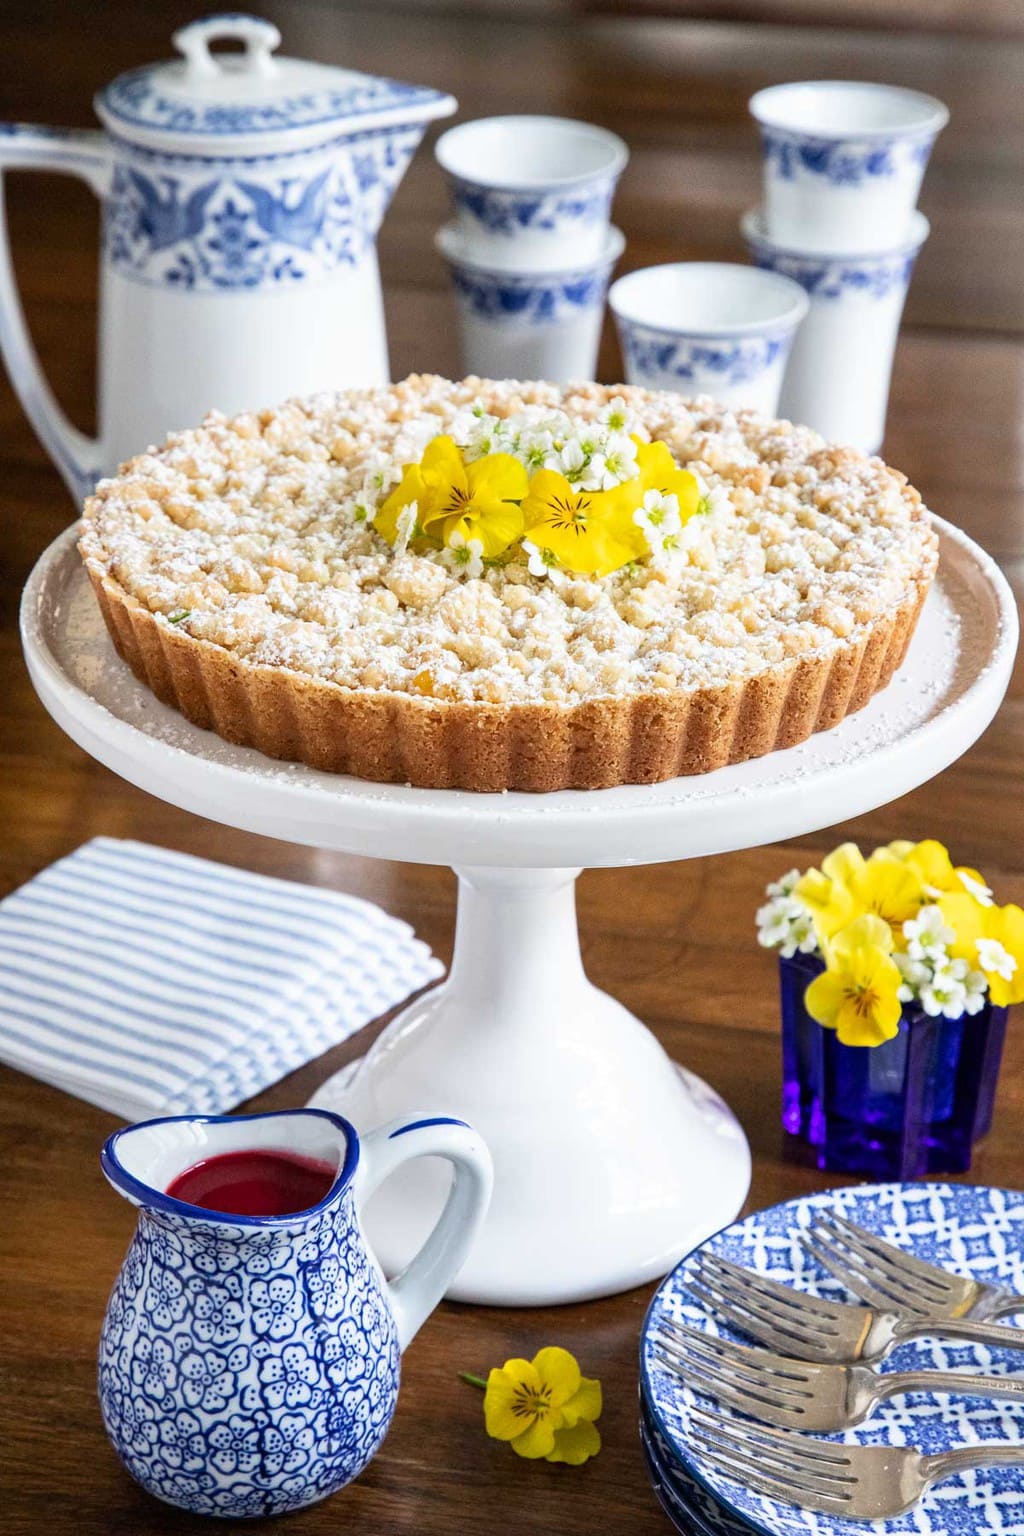 Vertical photo of a Lemon Curd Shortbread Tart on a white pedestal cake stand garnished with yellow pansies.